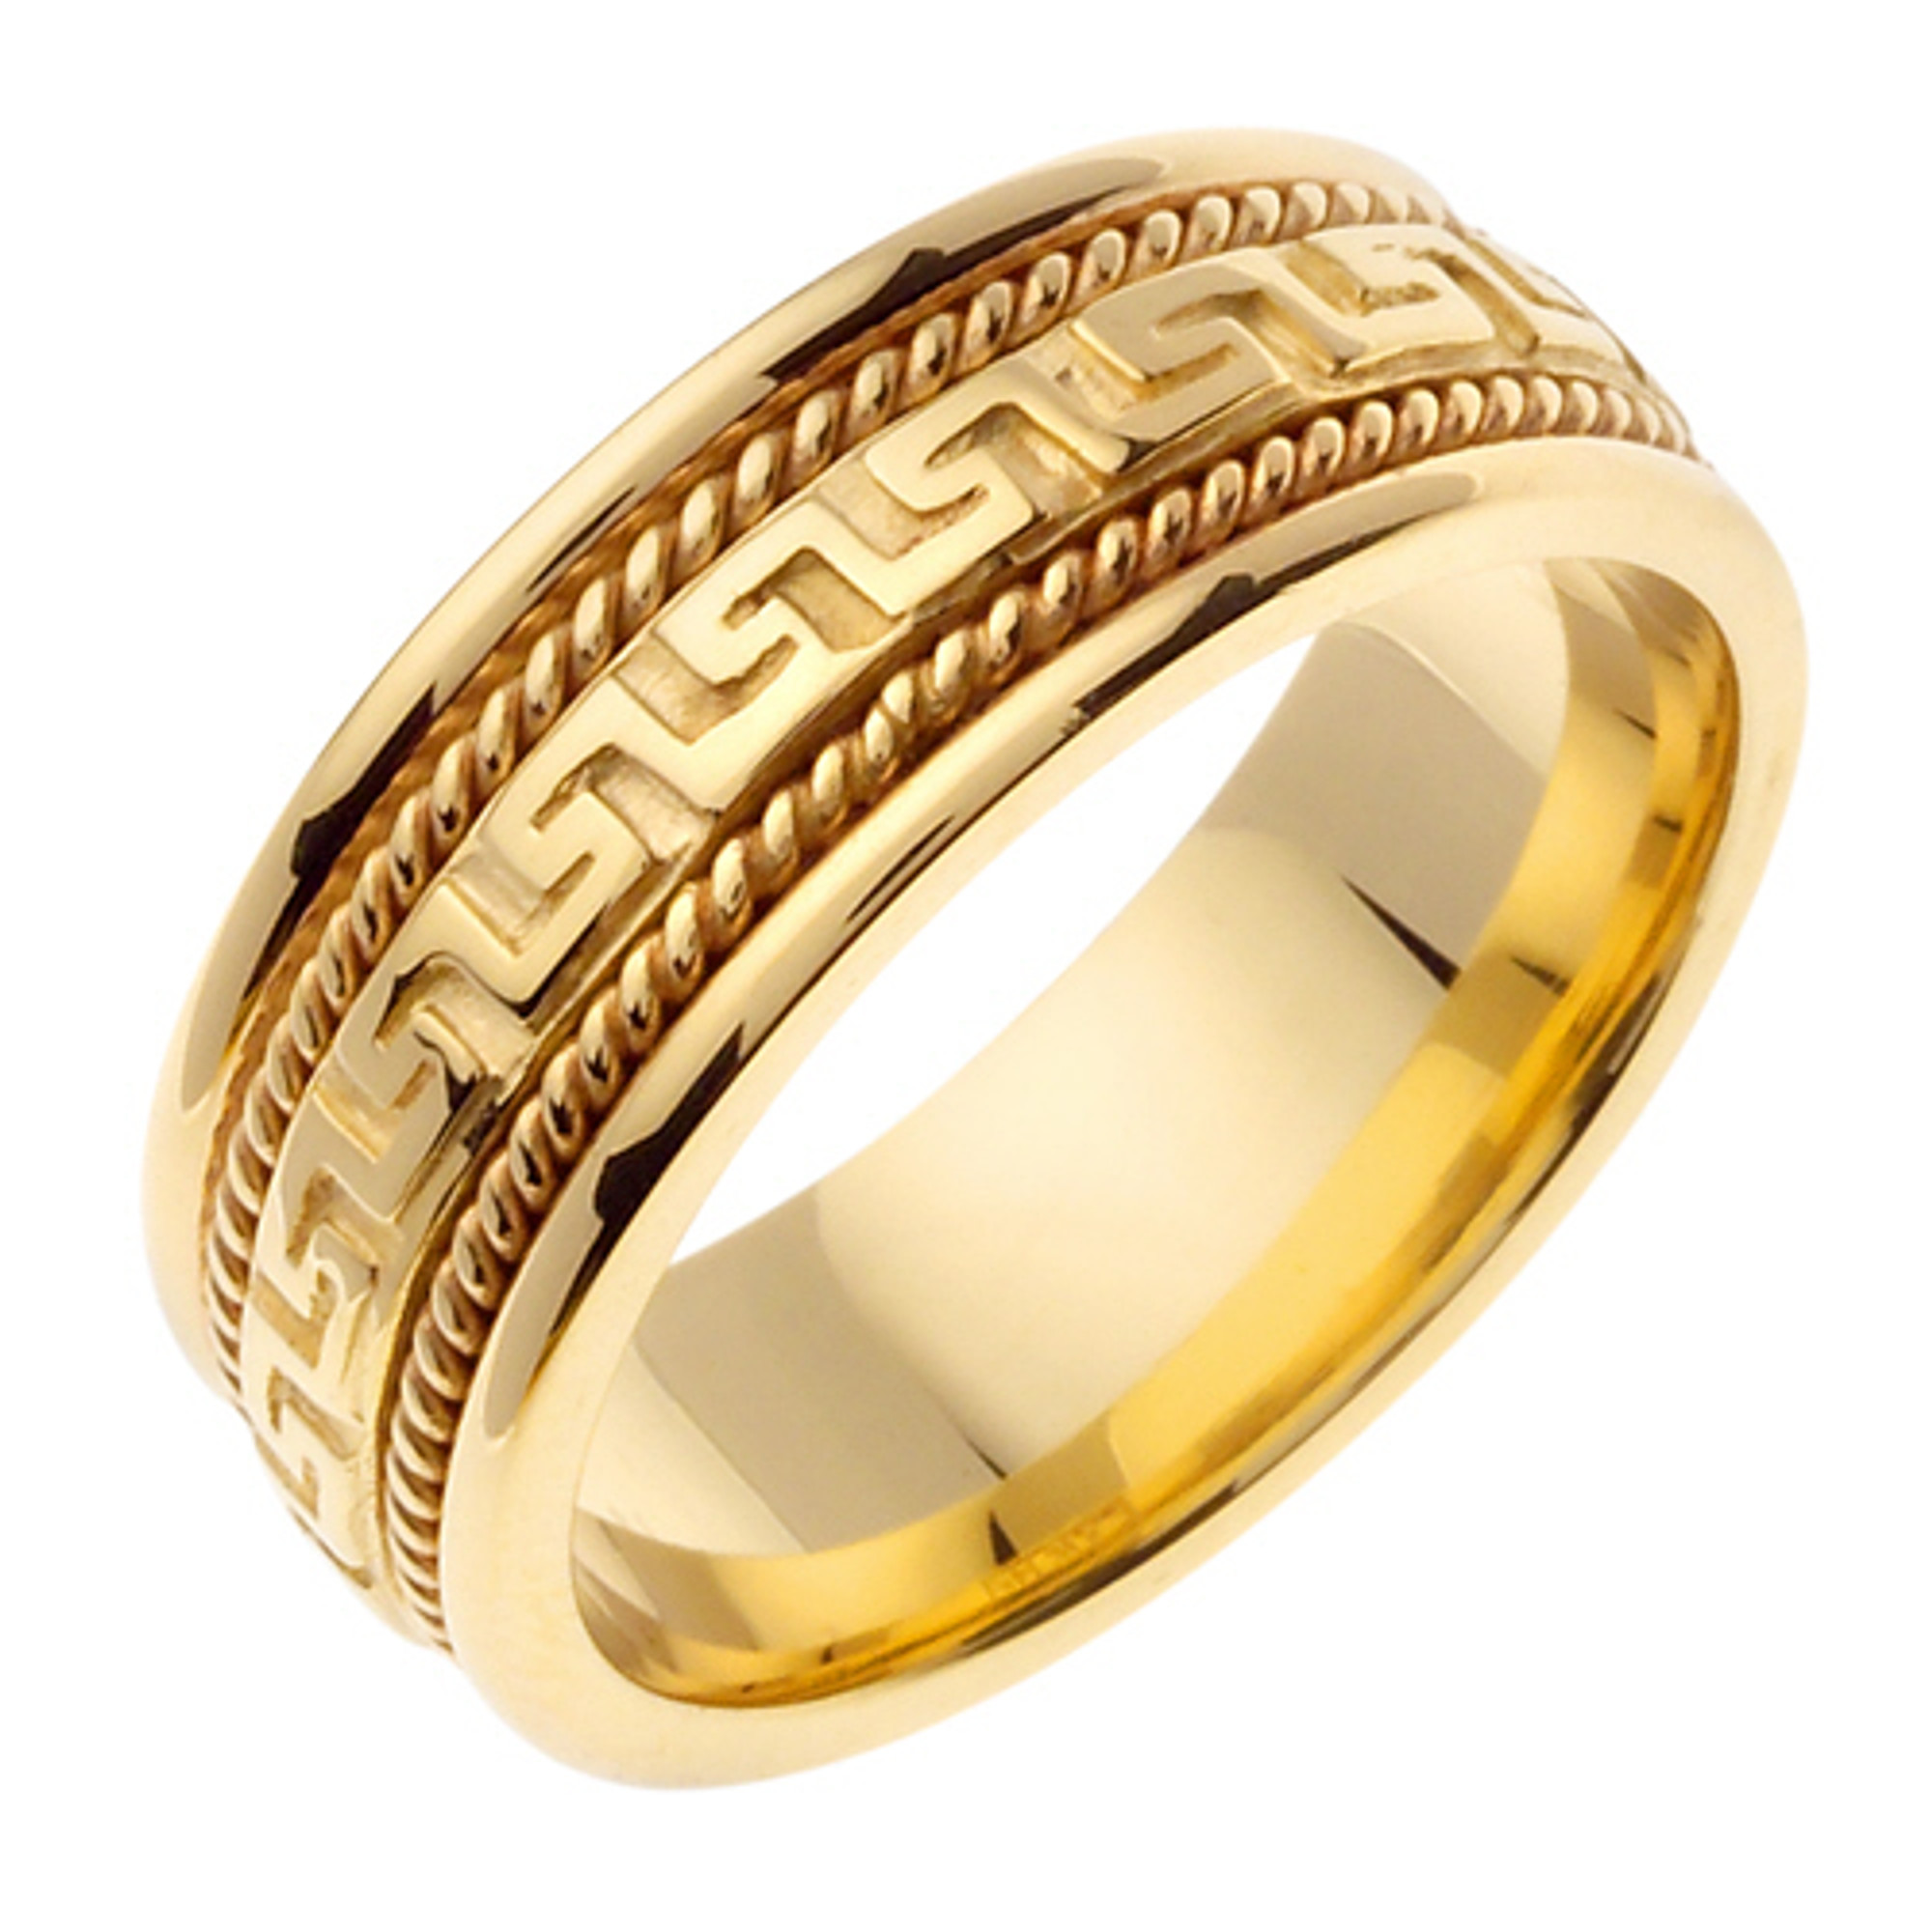 14K Yellow Gold 8mm hand made comfort fit wedding bands with wide